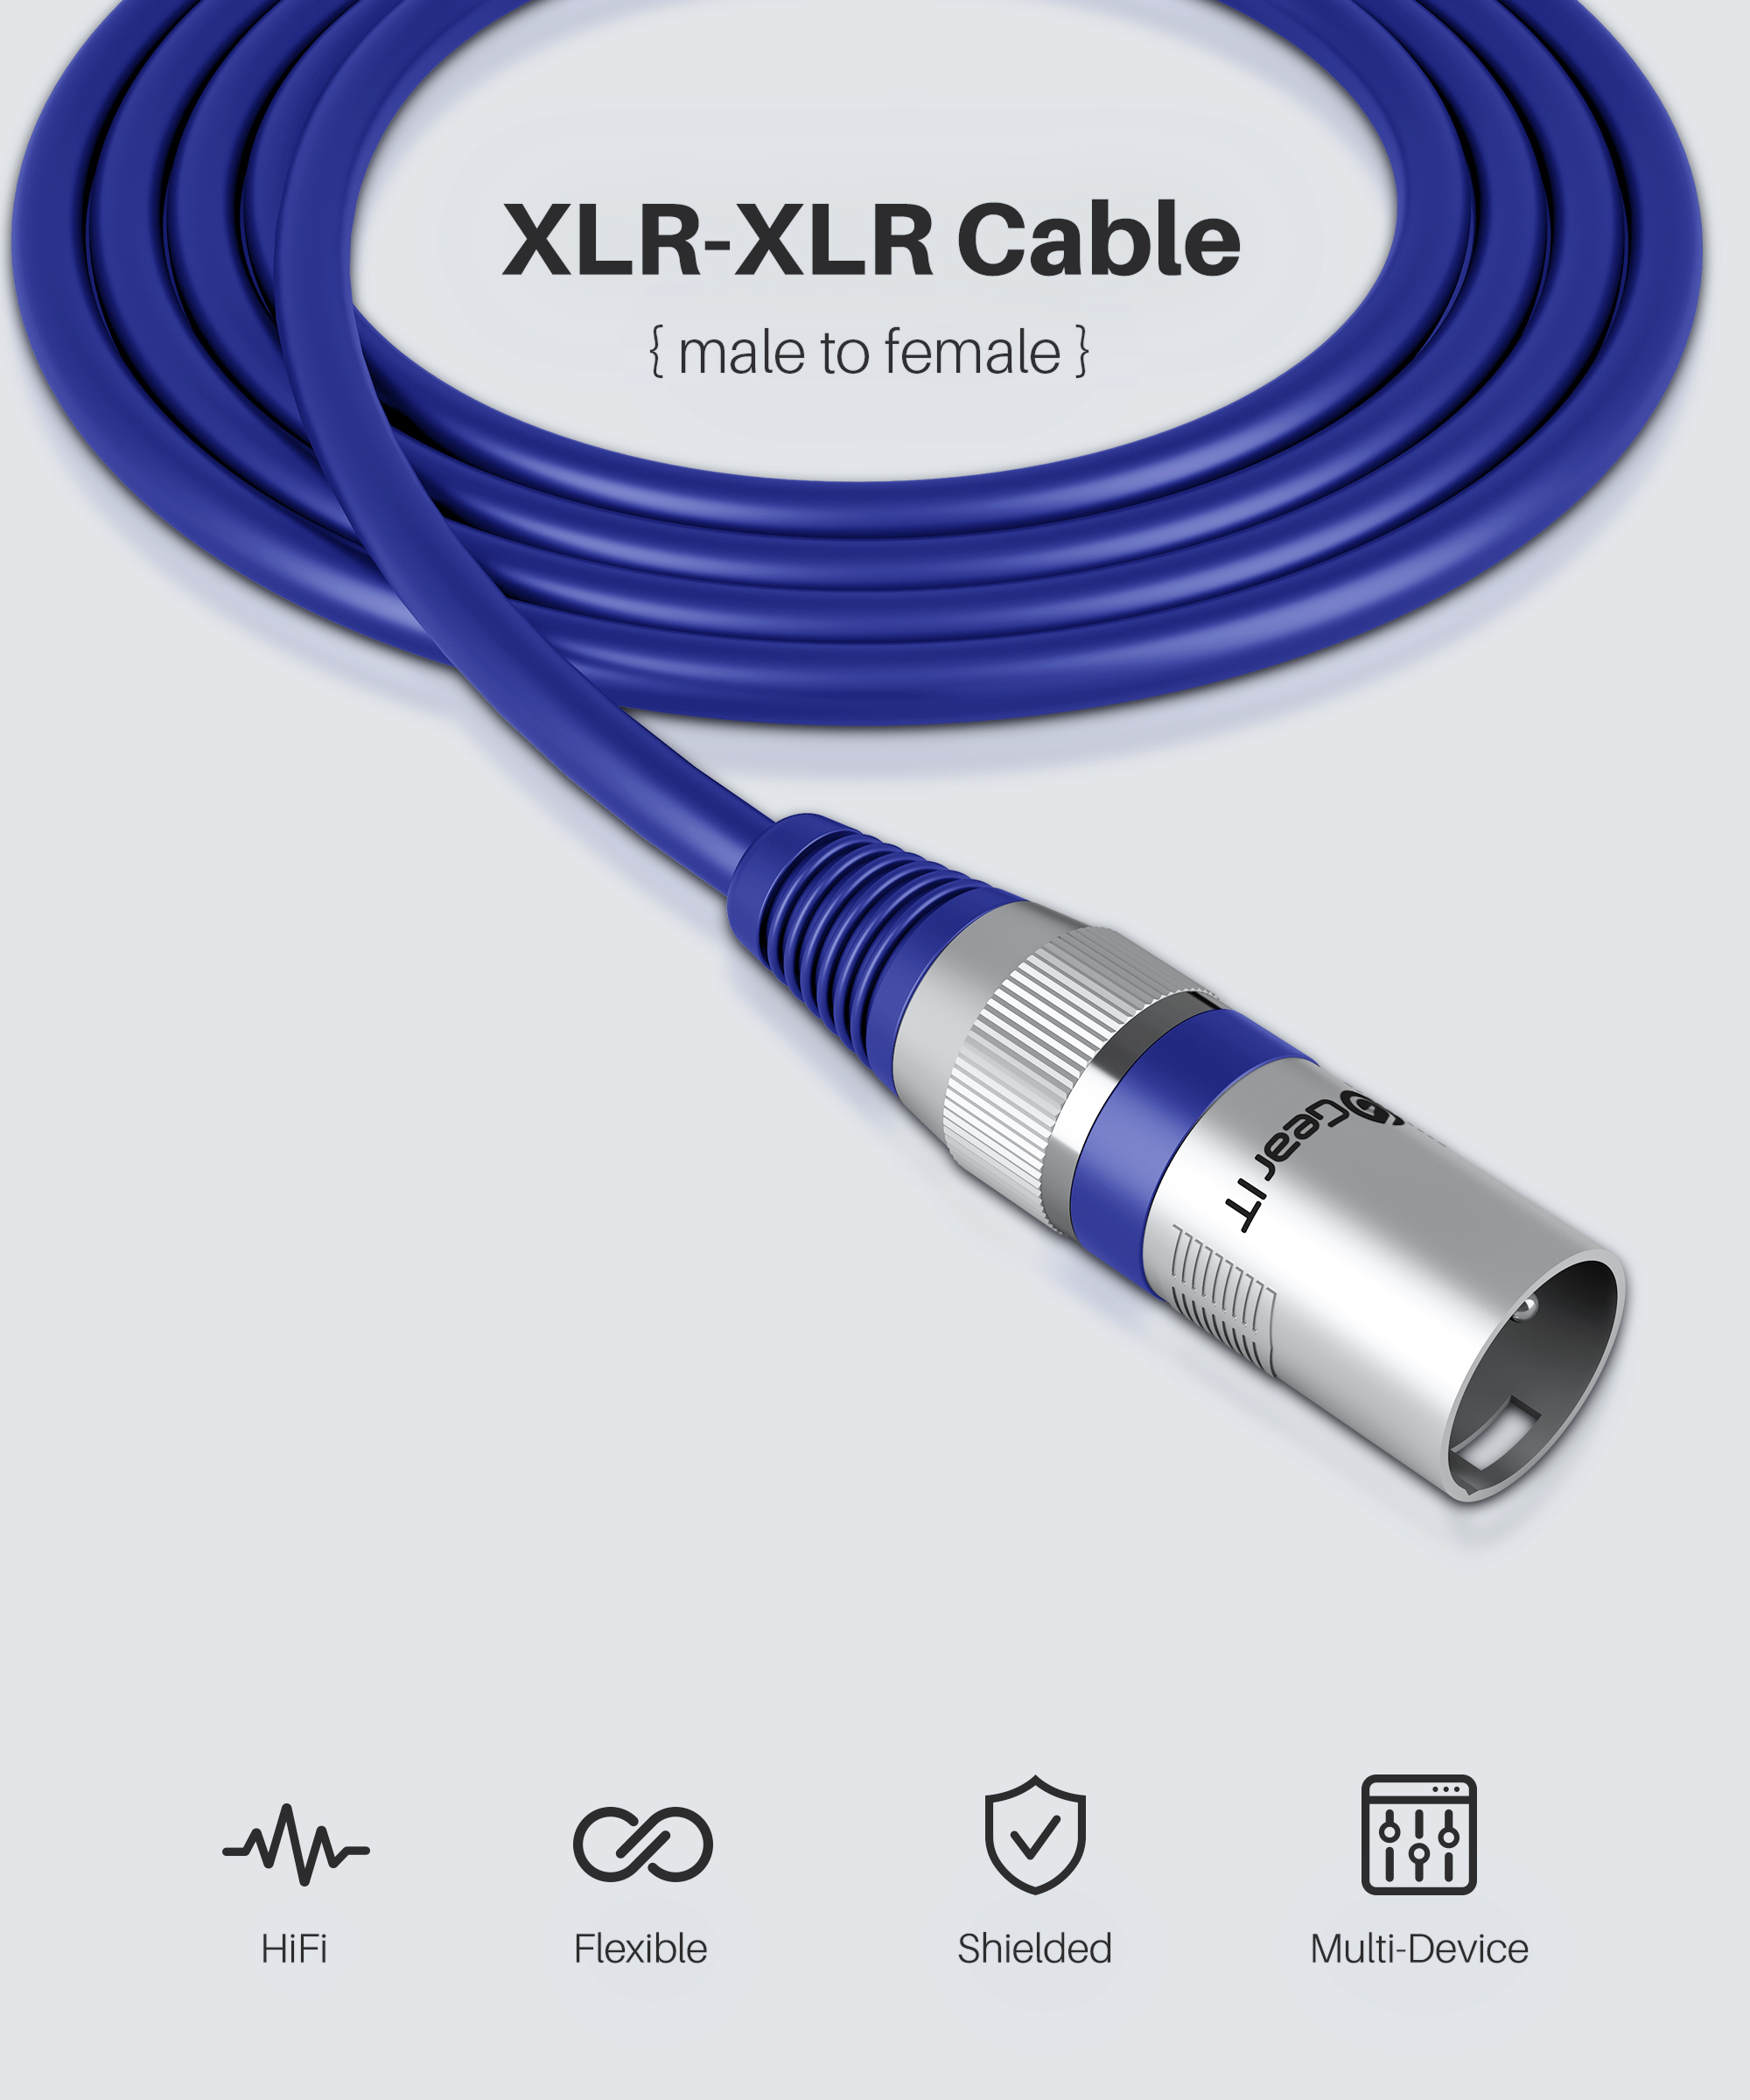 GearIT XLR to XLR Microphone Cable (100 Feet, 1 Pack) XLR Male to Female Mic Cable 3-Pin Balanced Shielded XLR Cable for Mic Mixer, Recording Studio, Podcast - Blue, 100Ft, 1 Pack - image 2 of 7